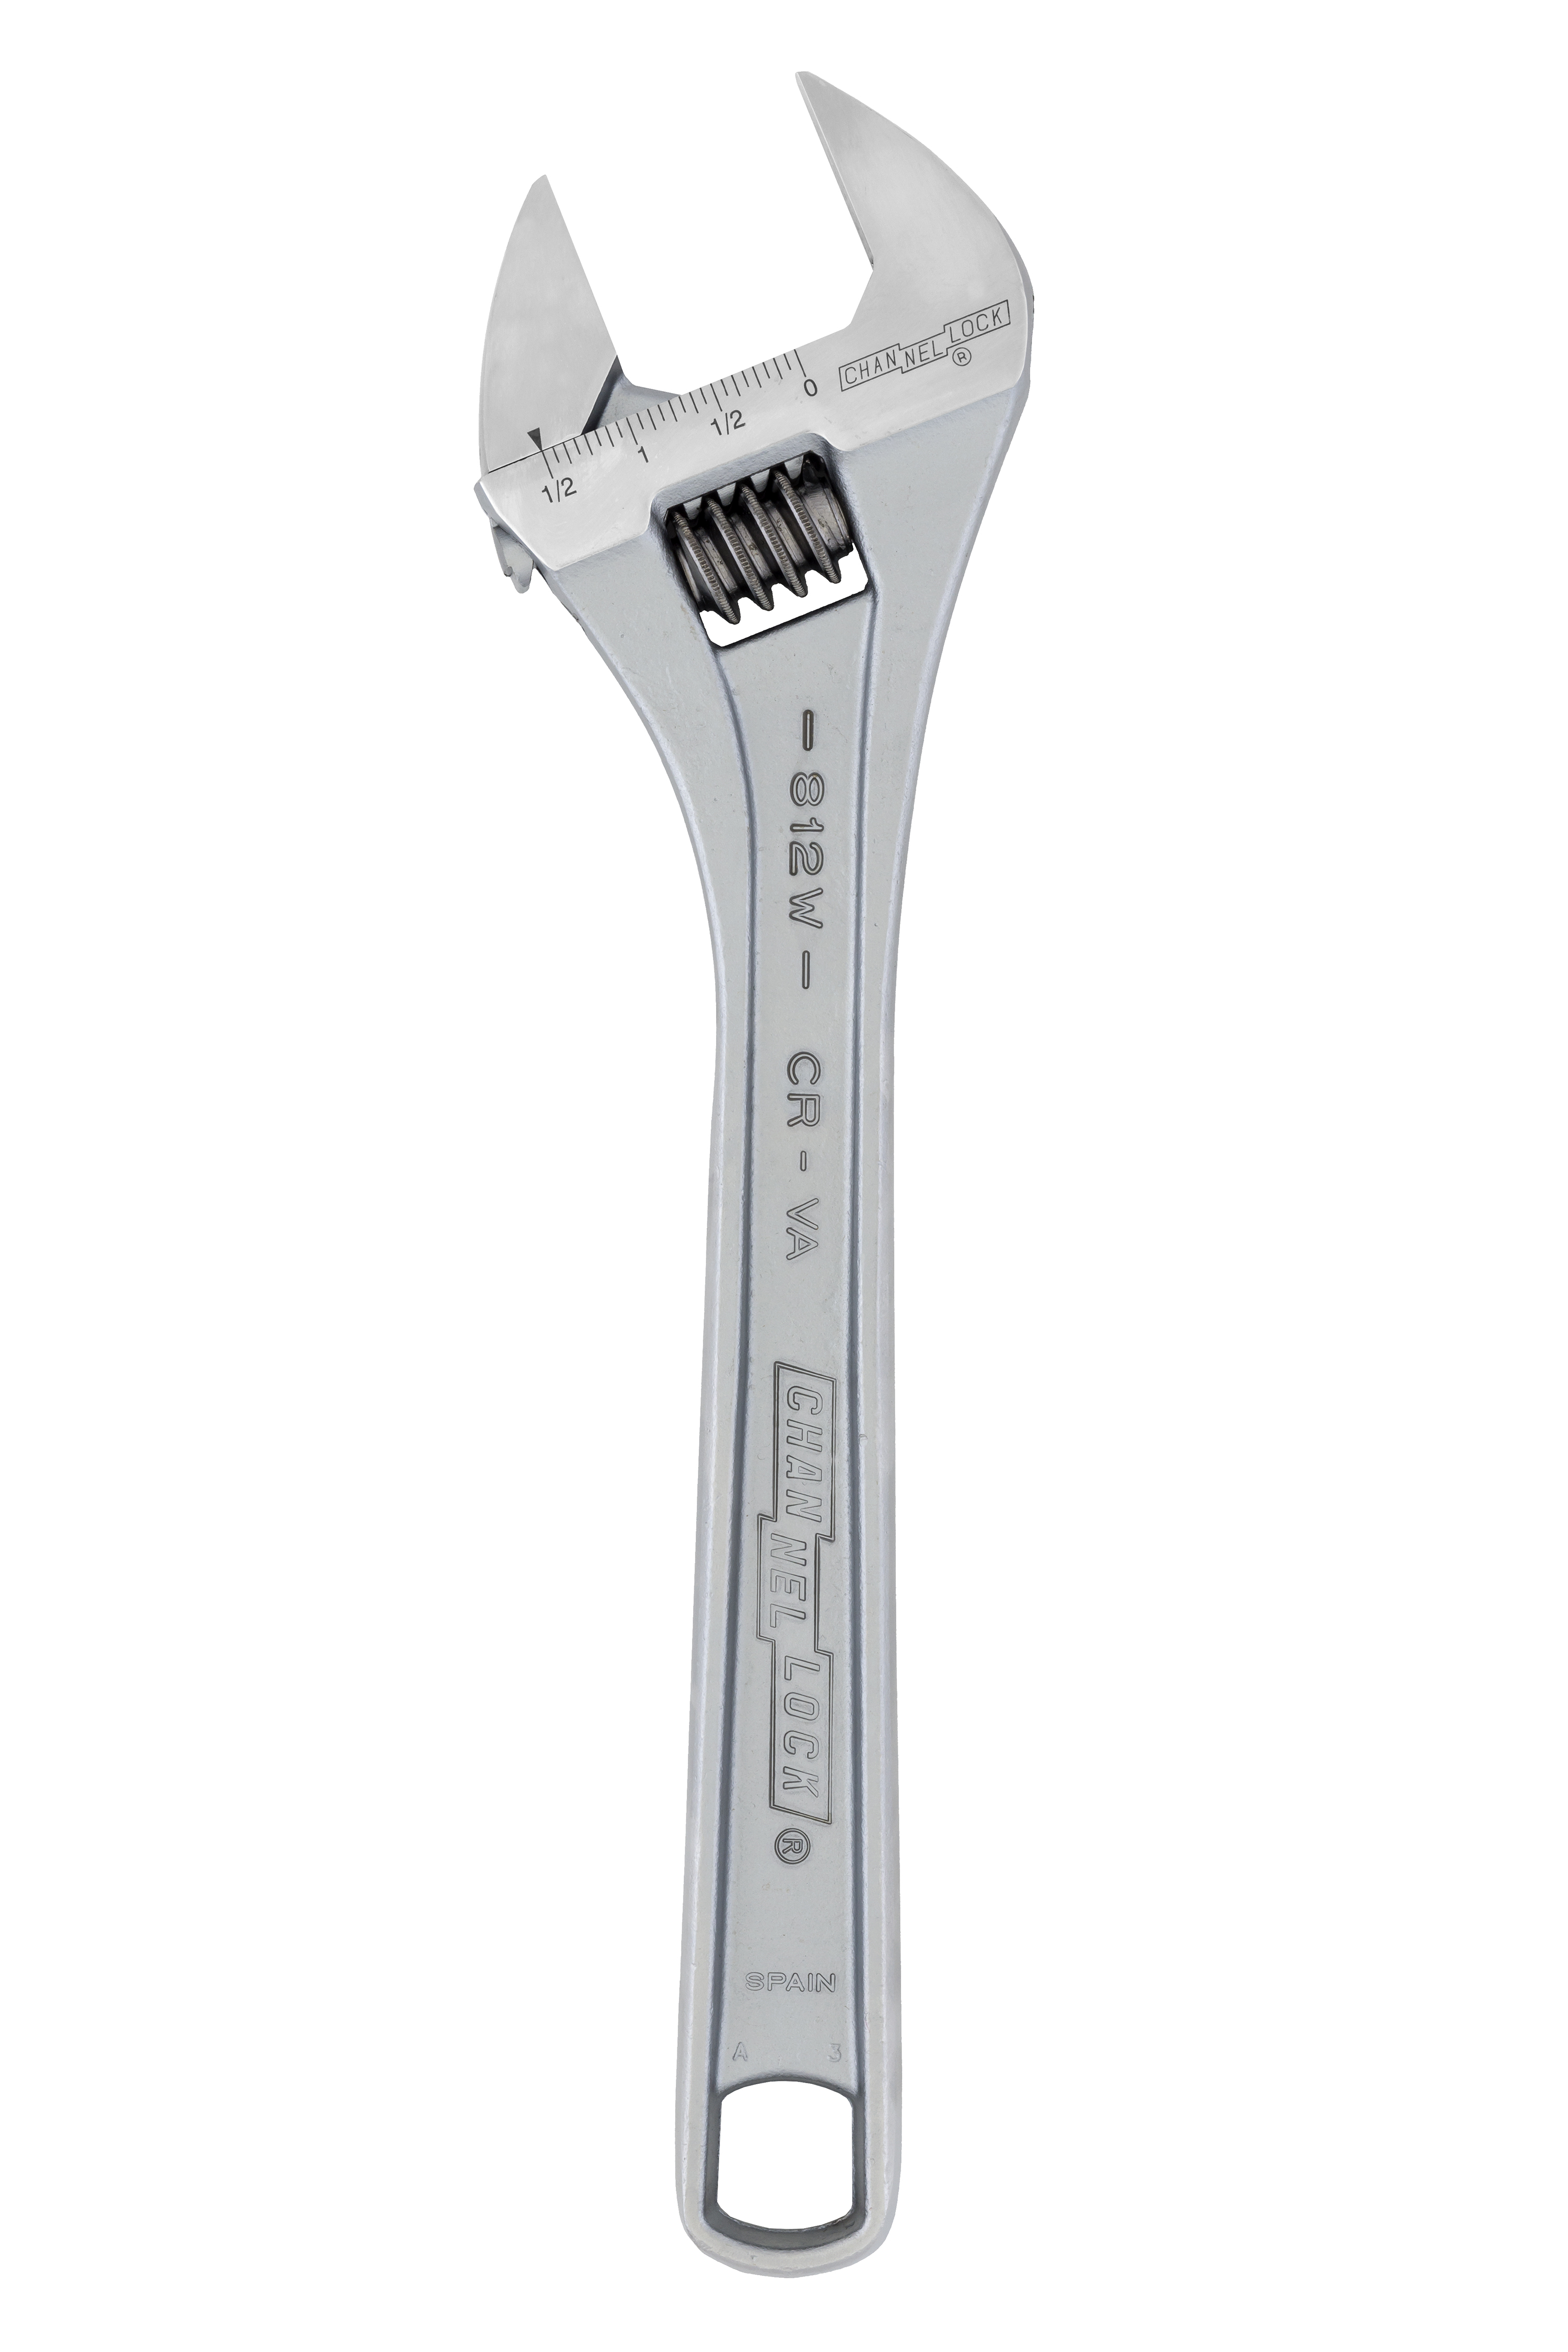 12" Chrome Wide Adjustable Wrench